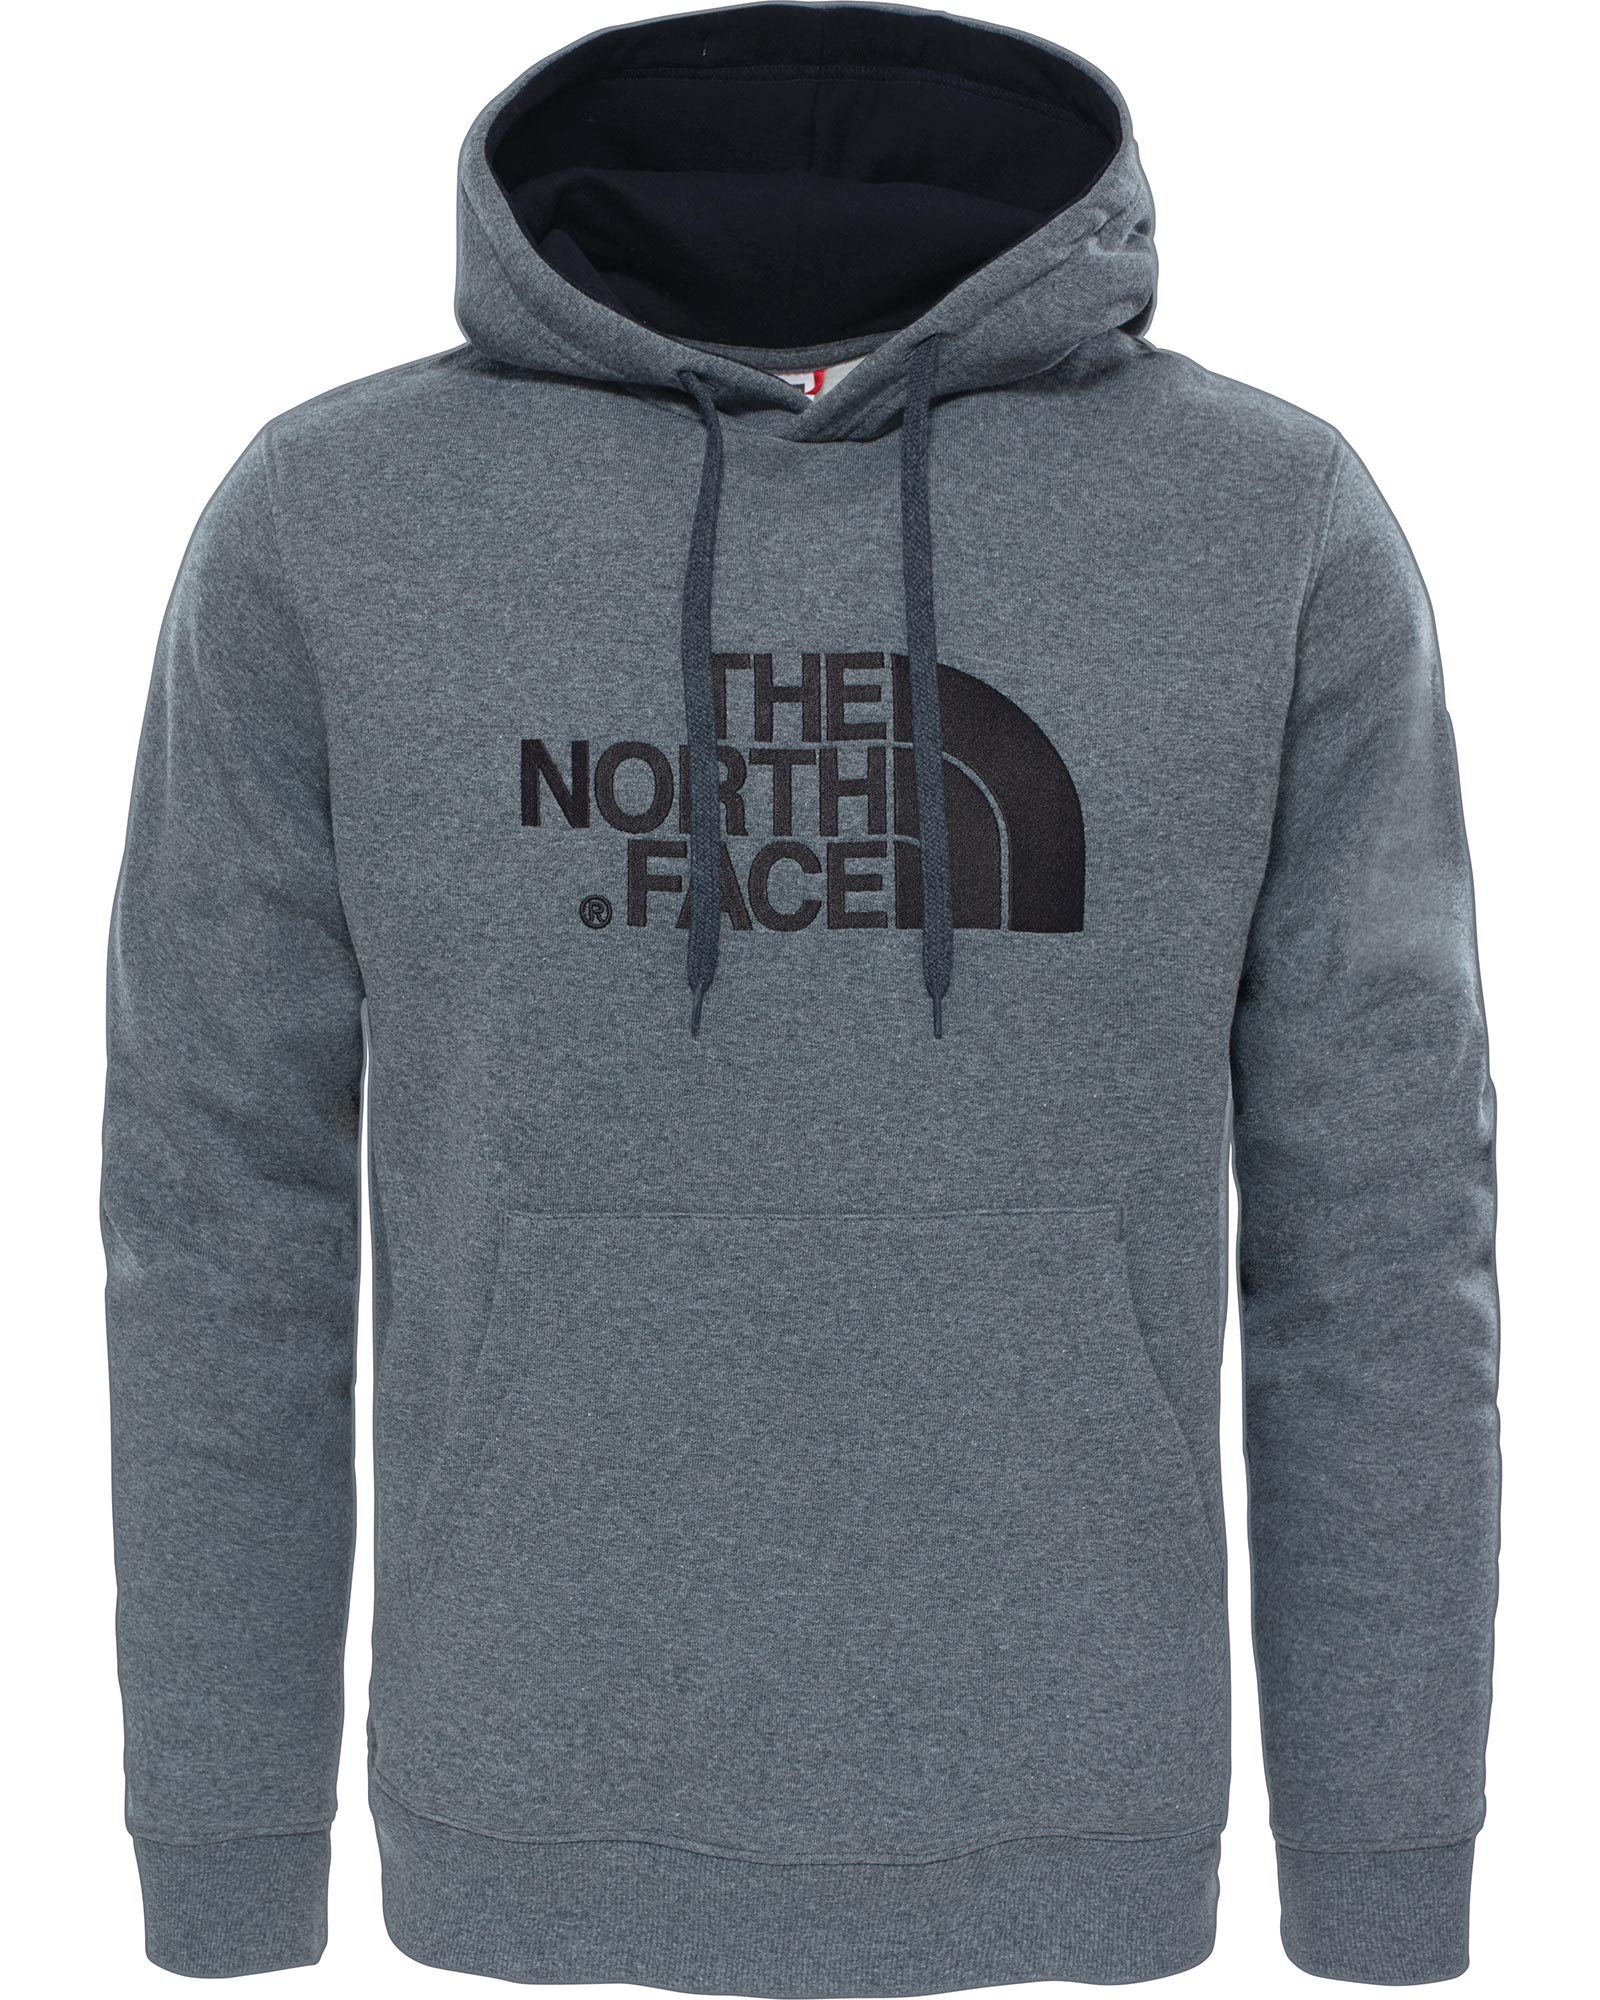 Product image of The North Face Drew Peak Pullover Men's Hoodie